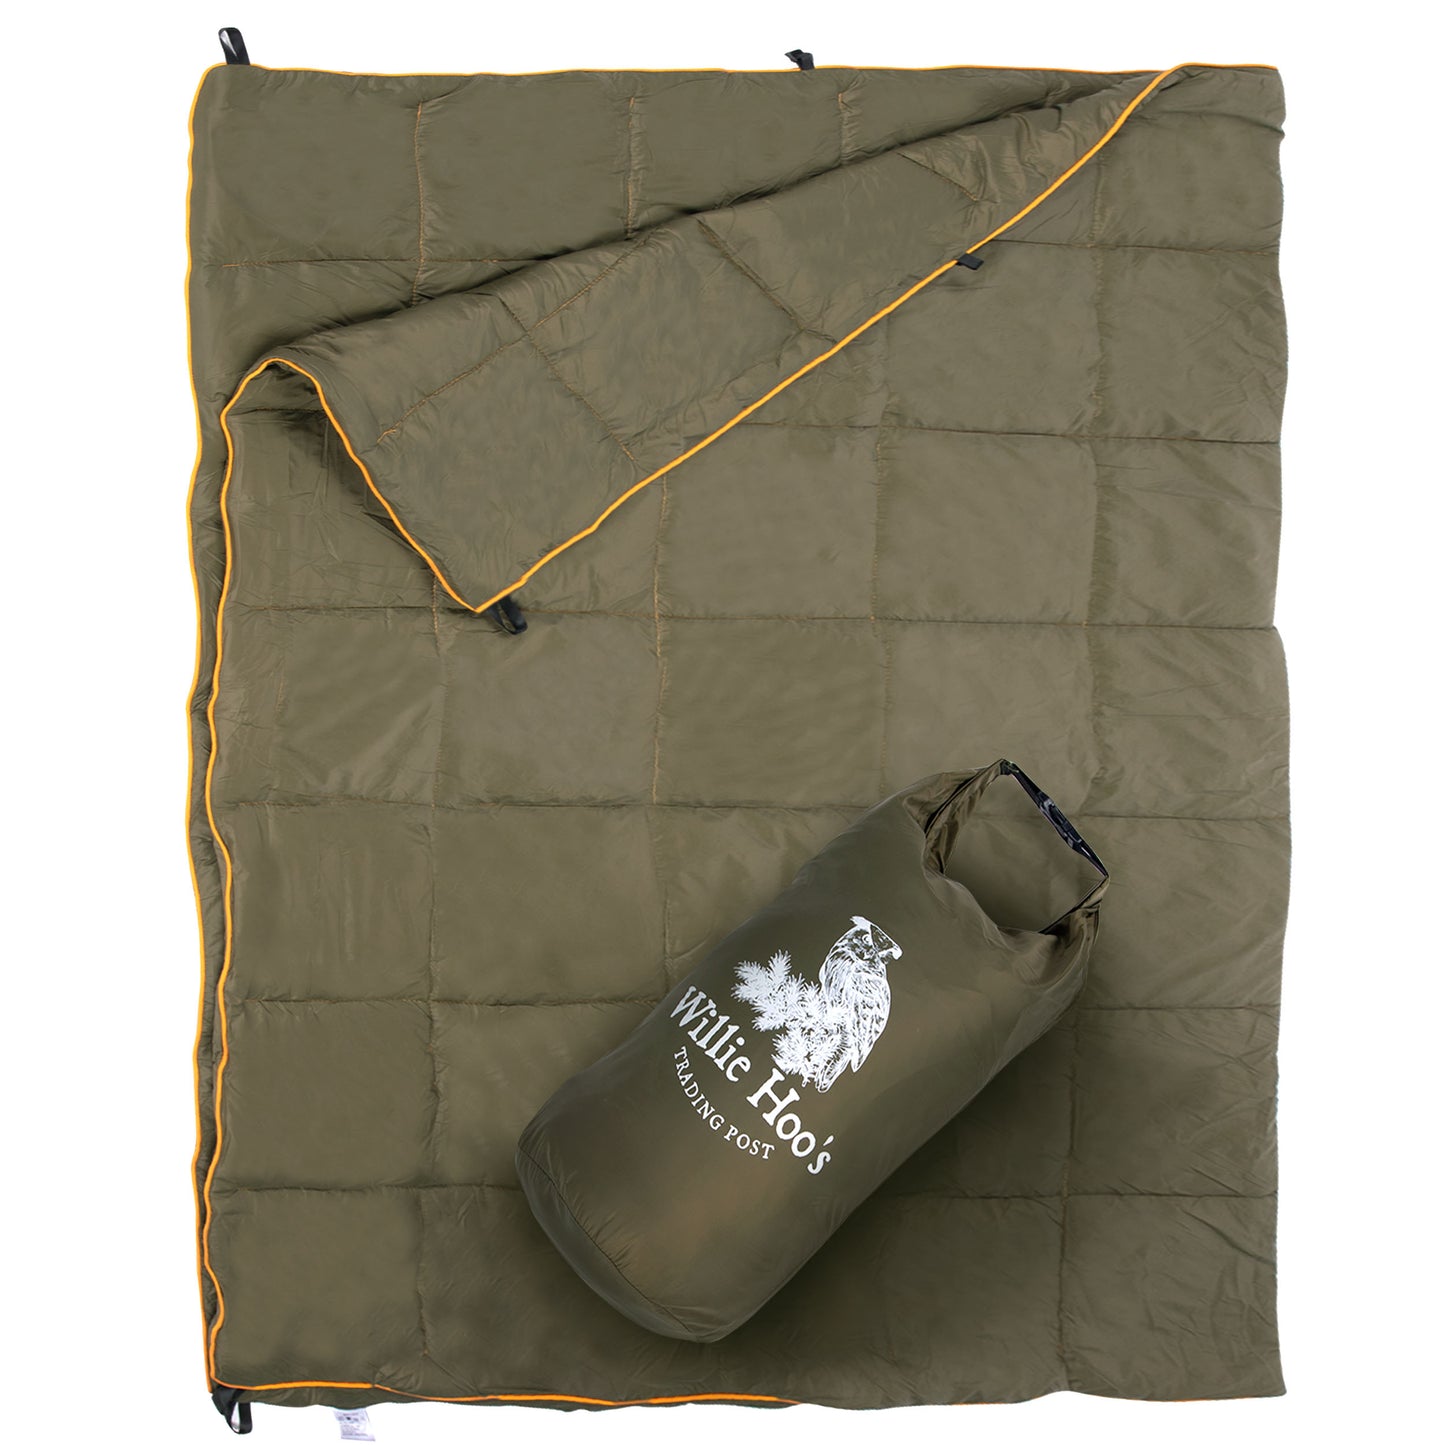 Camping Blanket - Willie Hoo's Trading Post